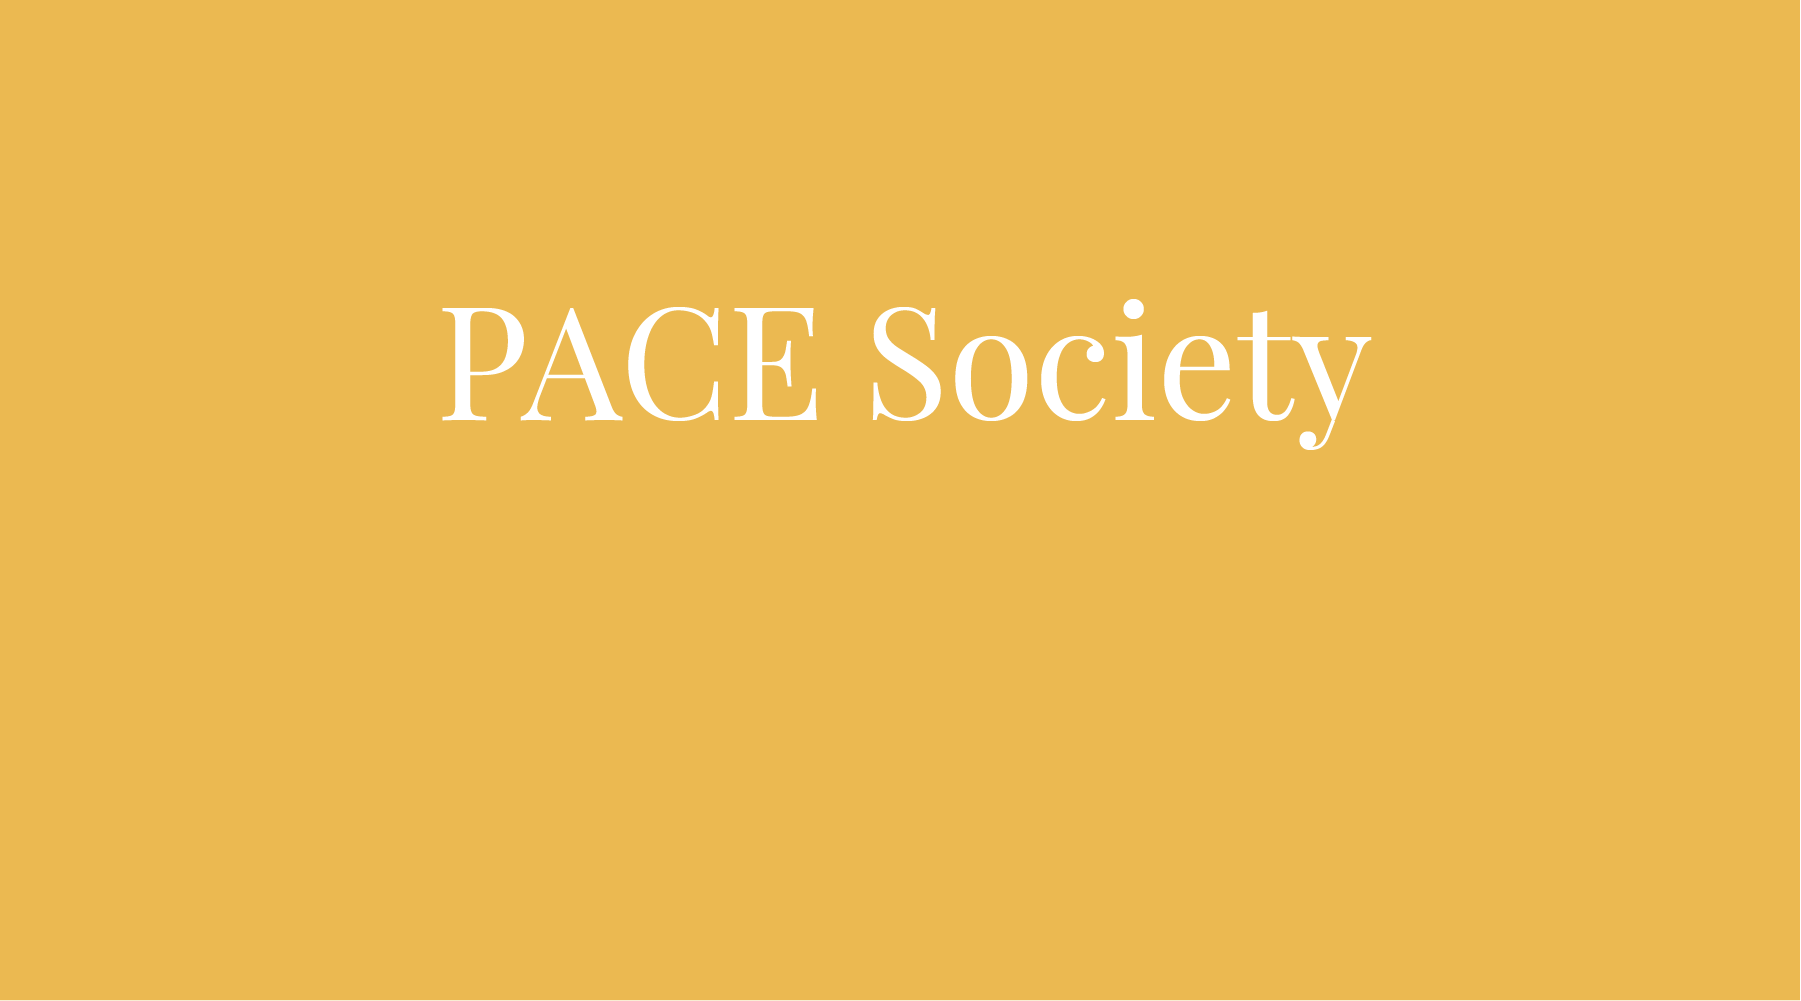 OUR JANUARY NON-PROFIT - PACE SOCIETY